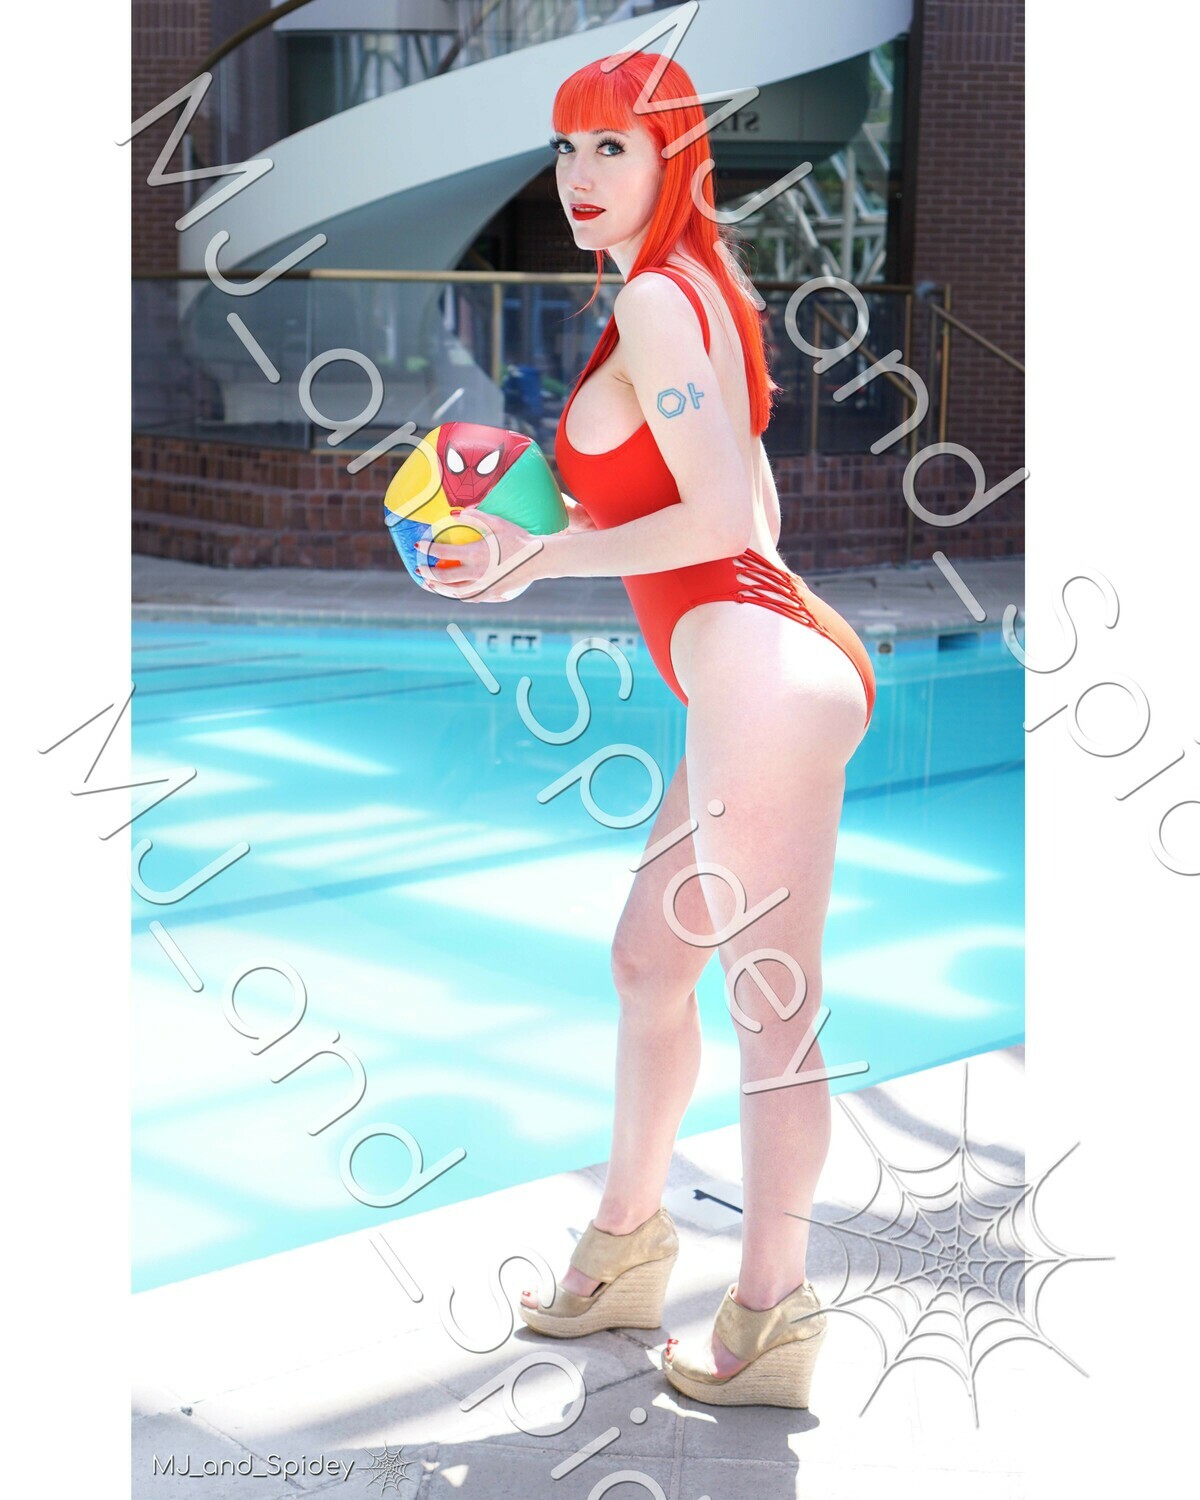 Marvel - Spider-Man - Mary Jane Watson - Swimsuit No. 2 - Digital Cosplay Image (@MJ_and_Spidey, MJ and Spidey, Comics)